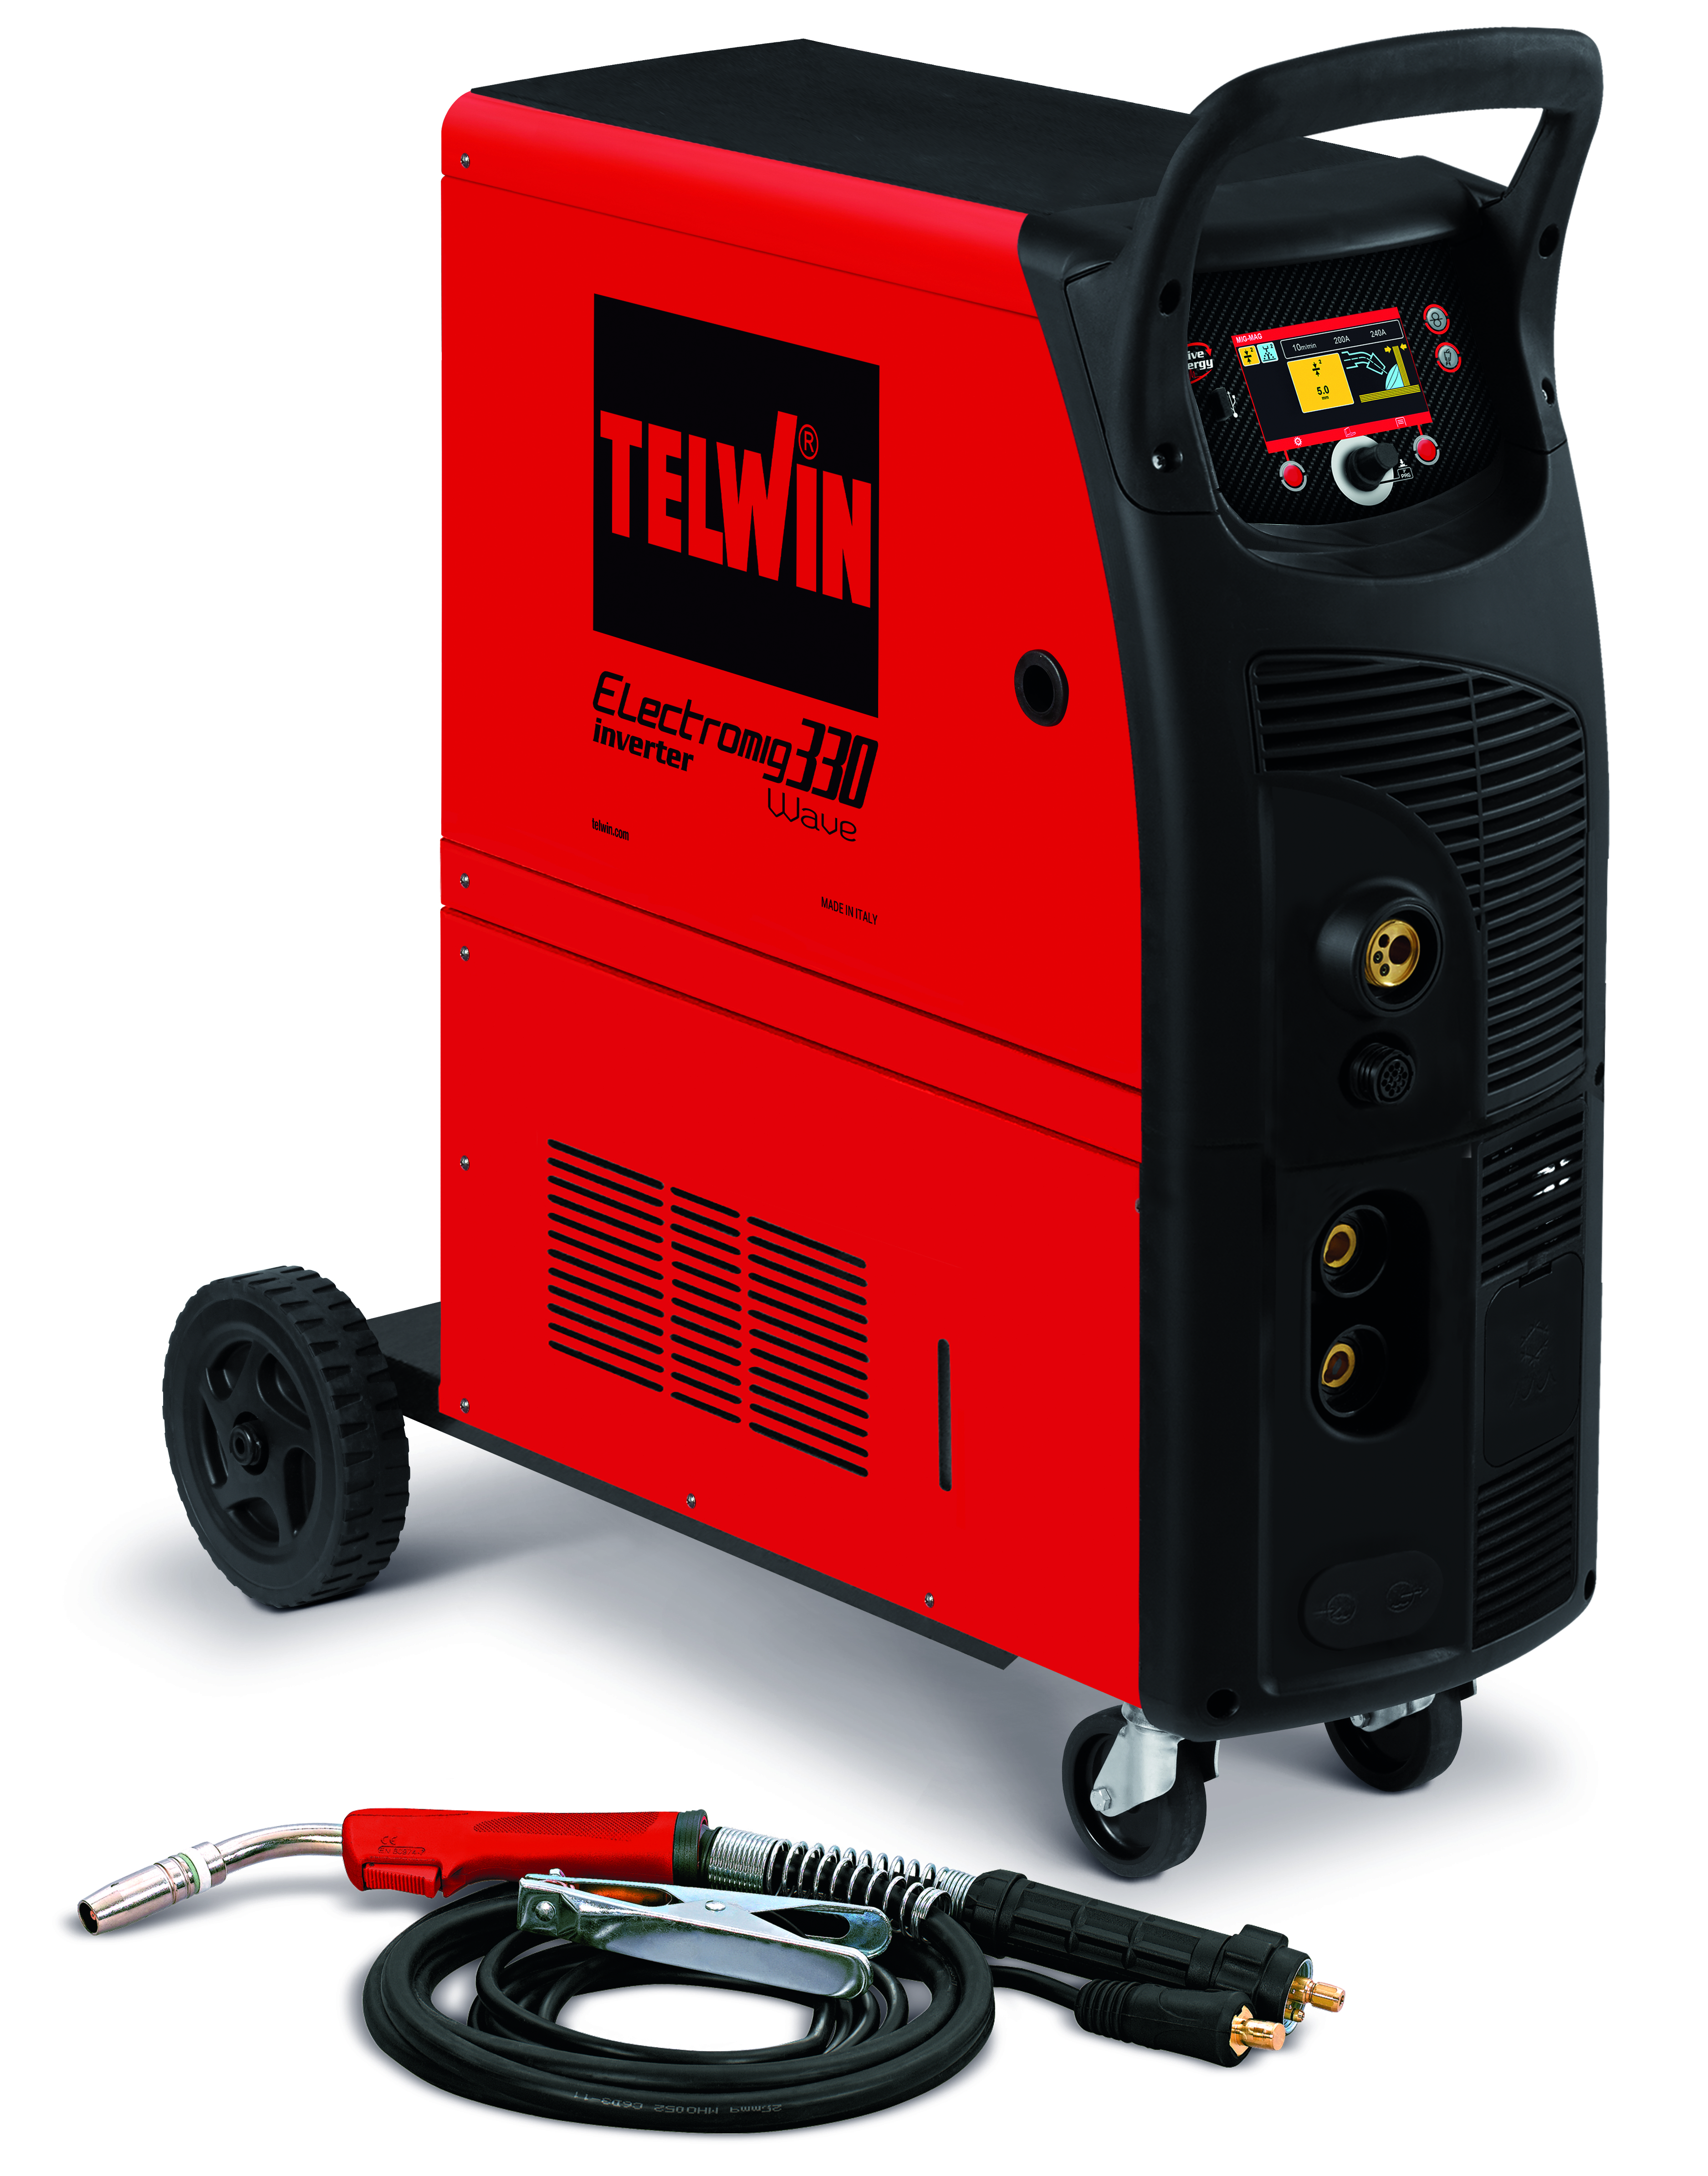 TELWIN 816061 - ELECTROMIG 330 WAVE 400V + ACC., MIG-MAG welding machine – P-Max(9kW)